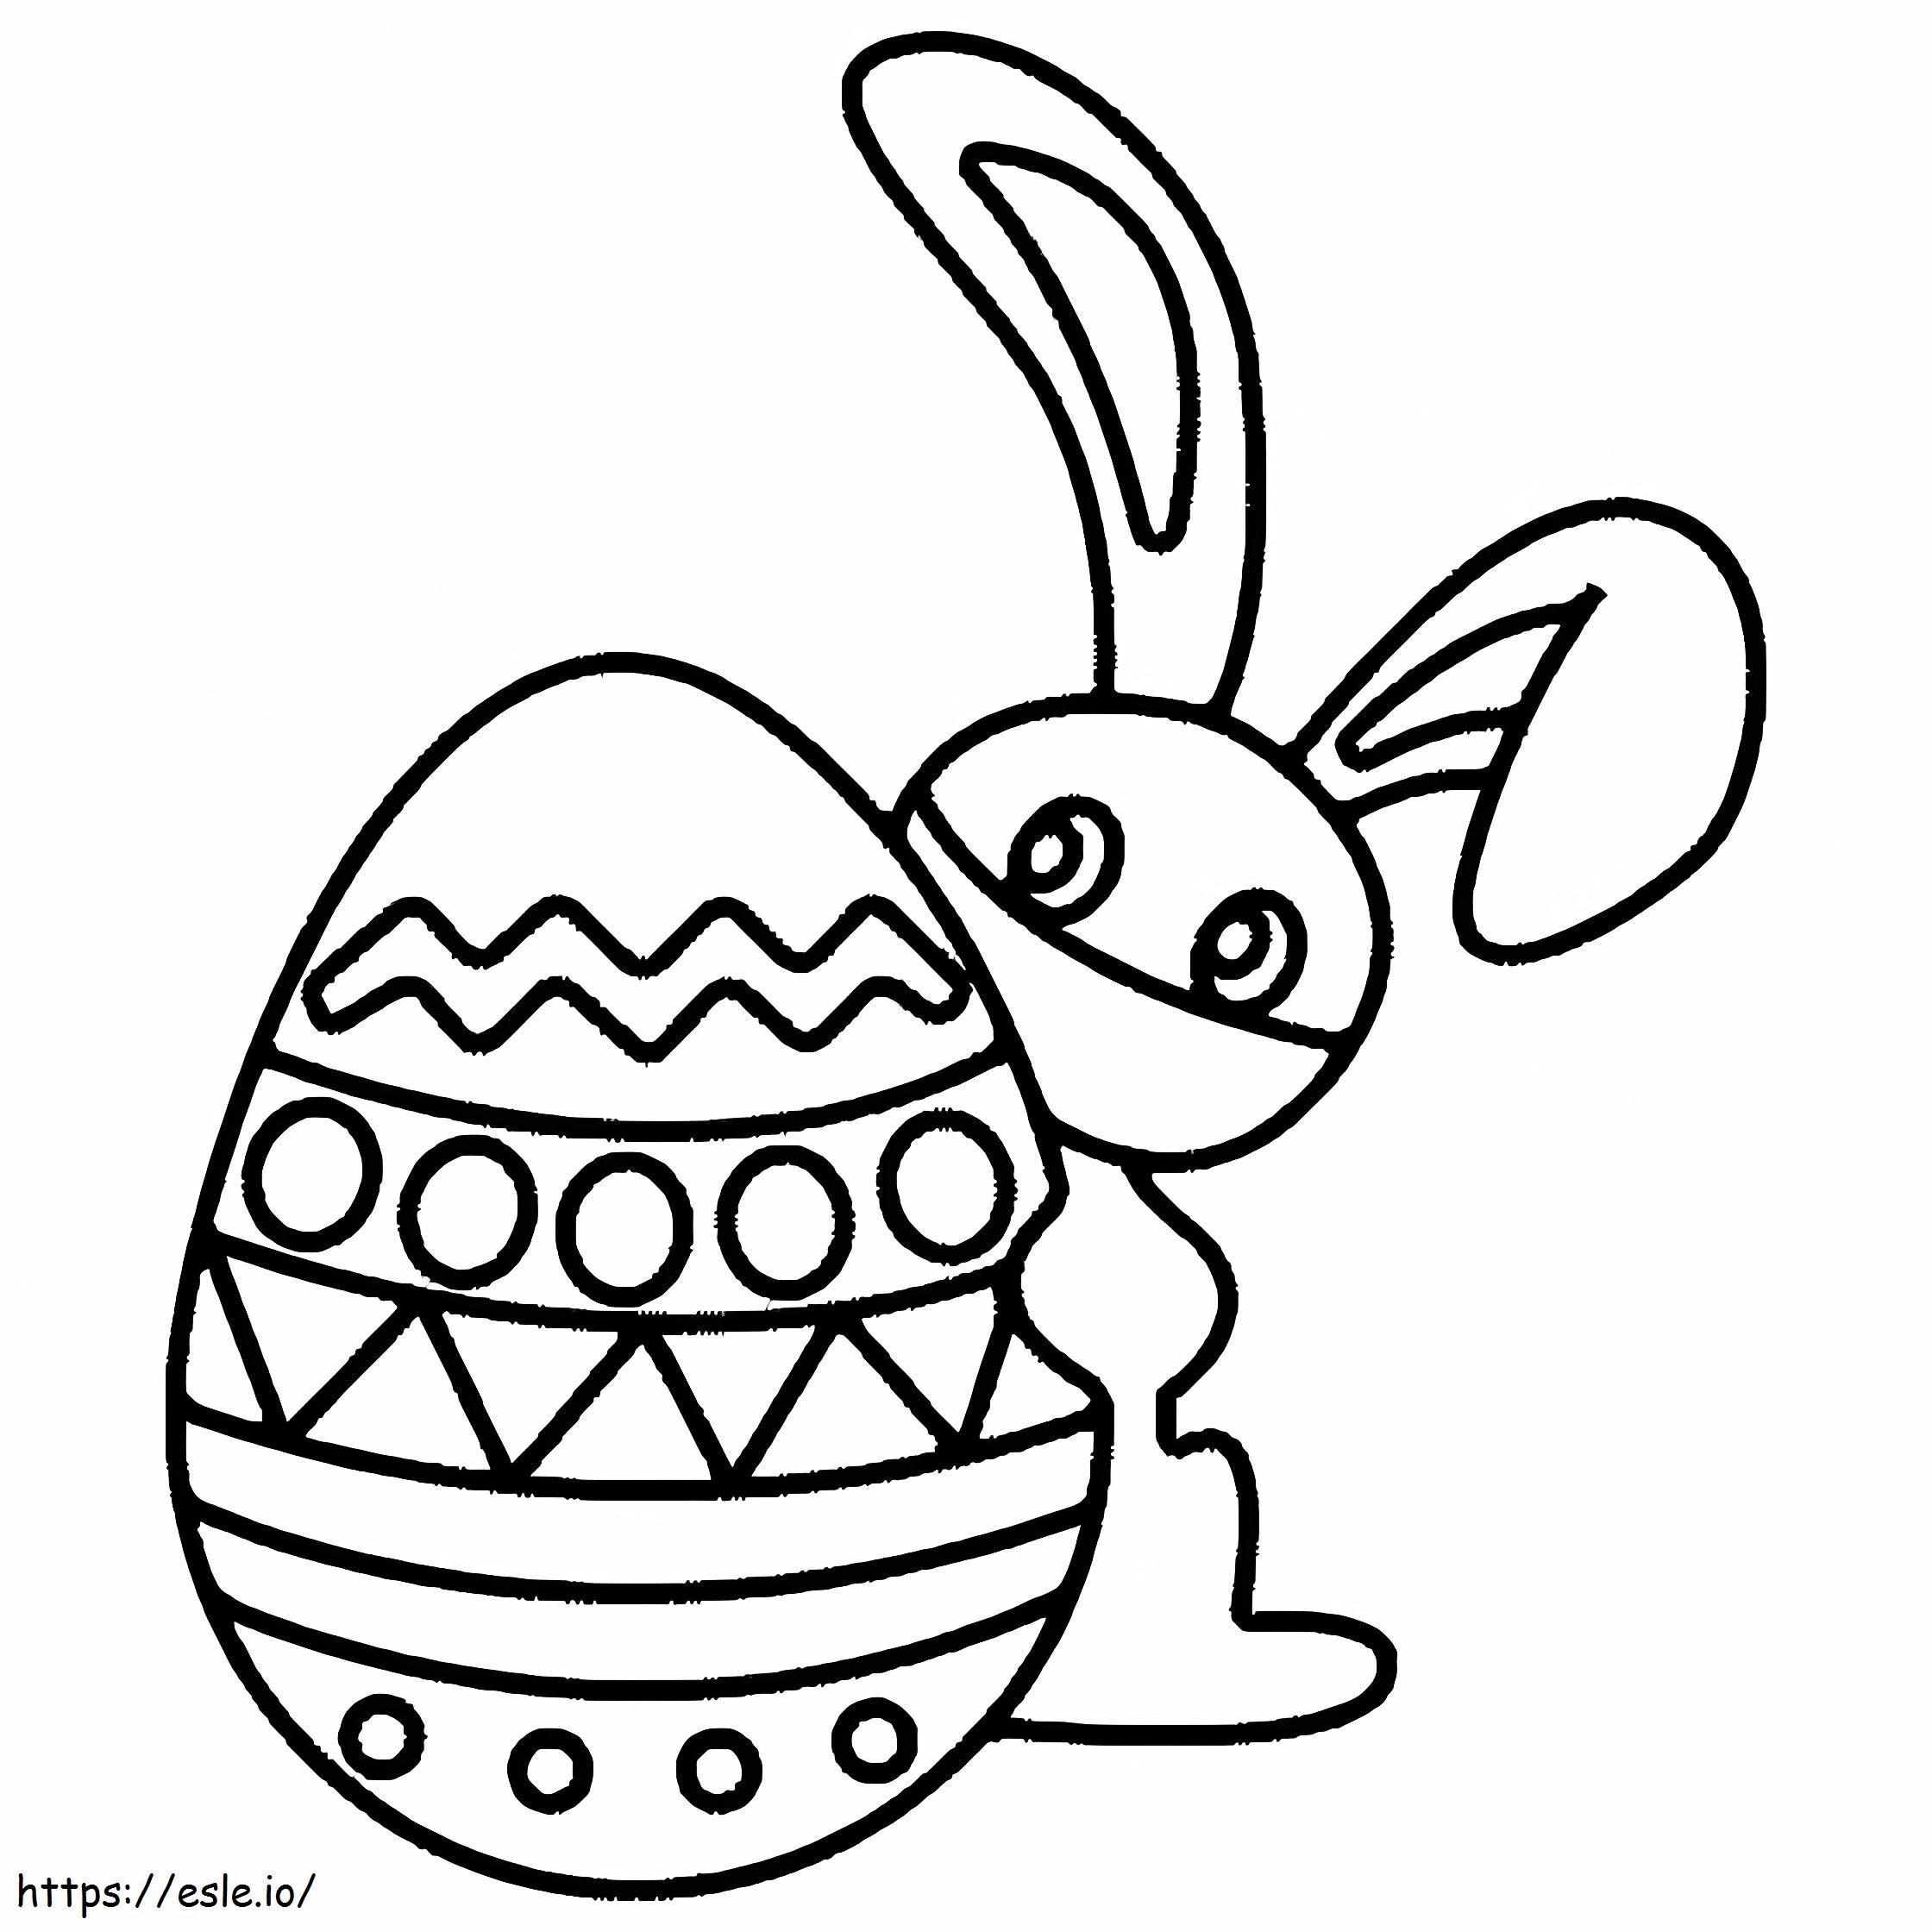 Drawing Bunny With Easter Egg coloring page